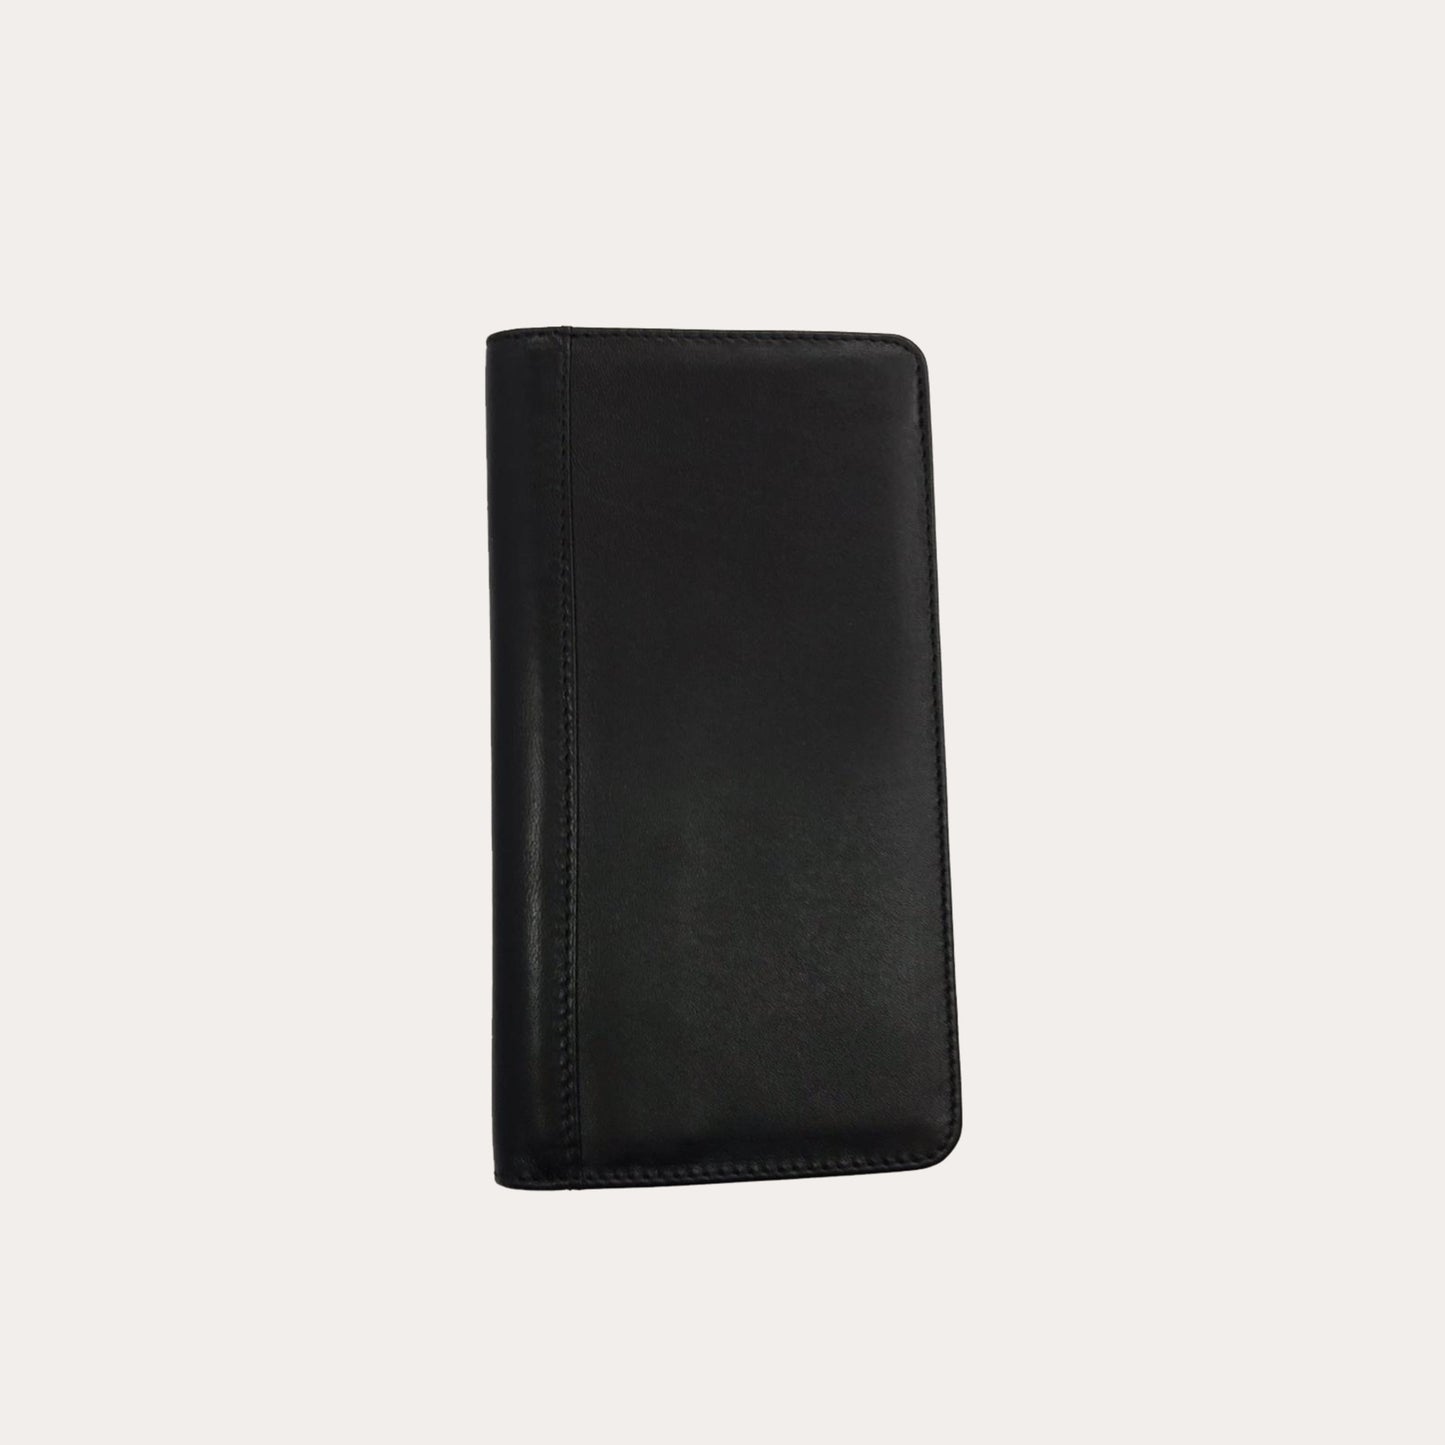 Long Black Leather Wallet-5 Credit Card Sections